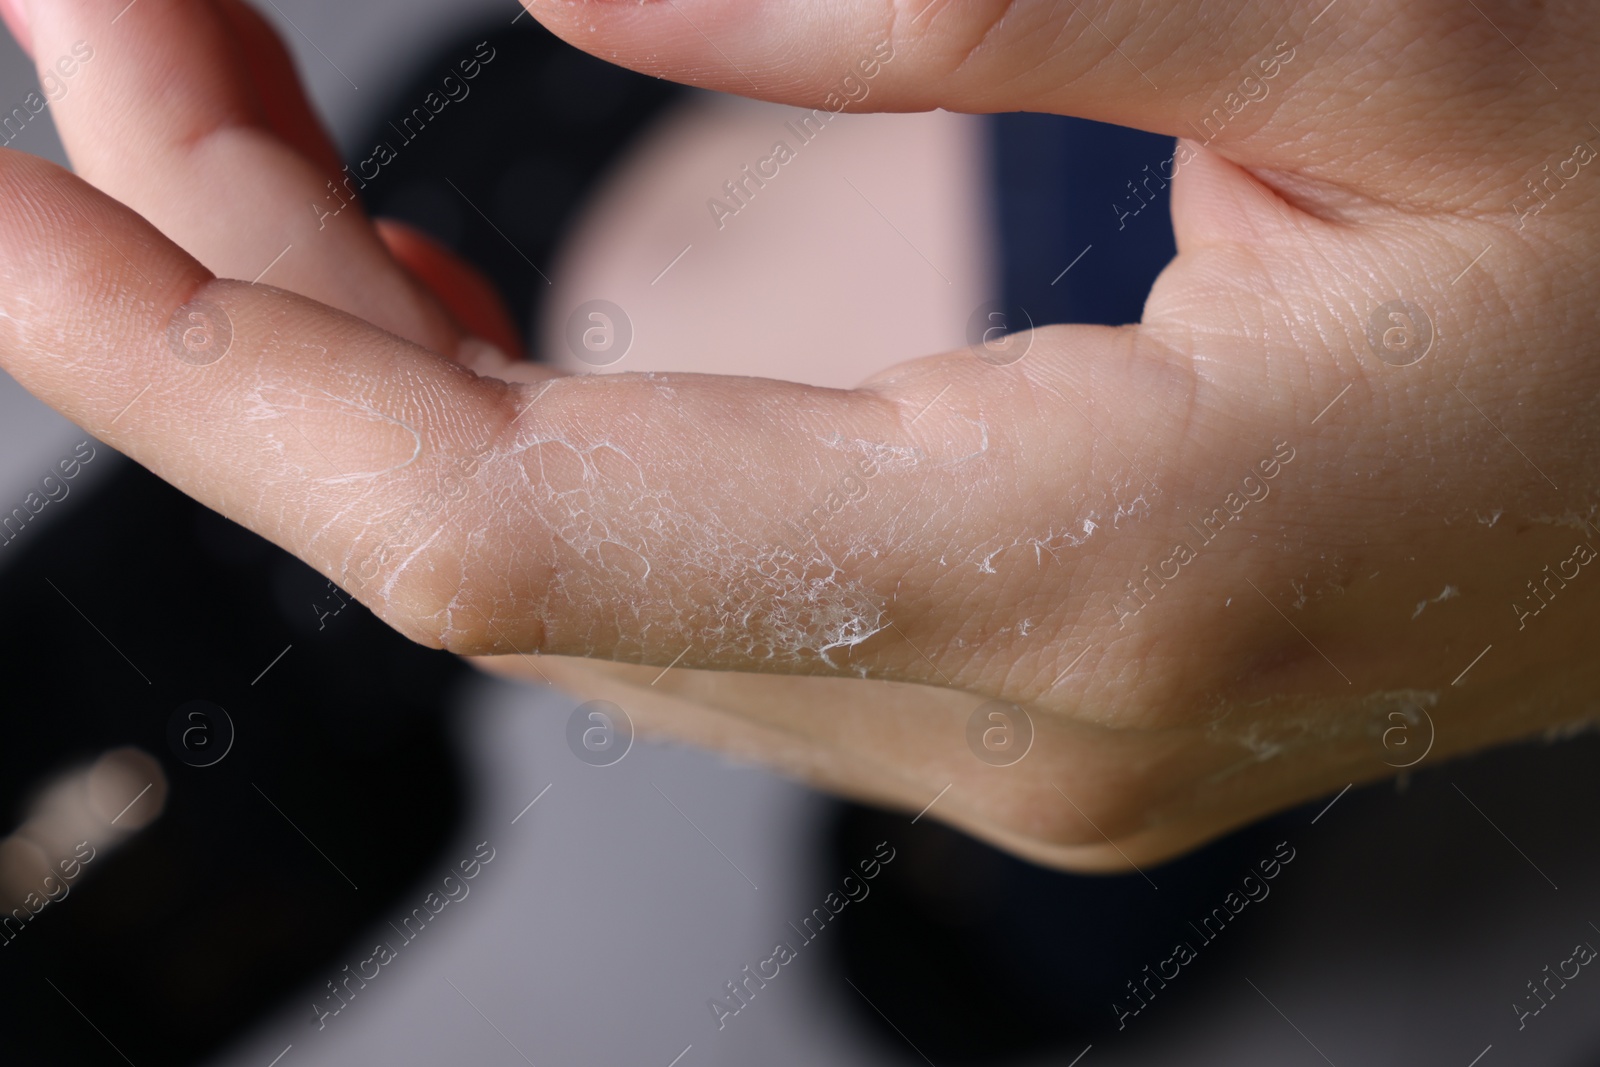 Photo of Woman with dry skin on hand against blurred background, macro view